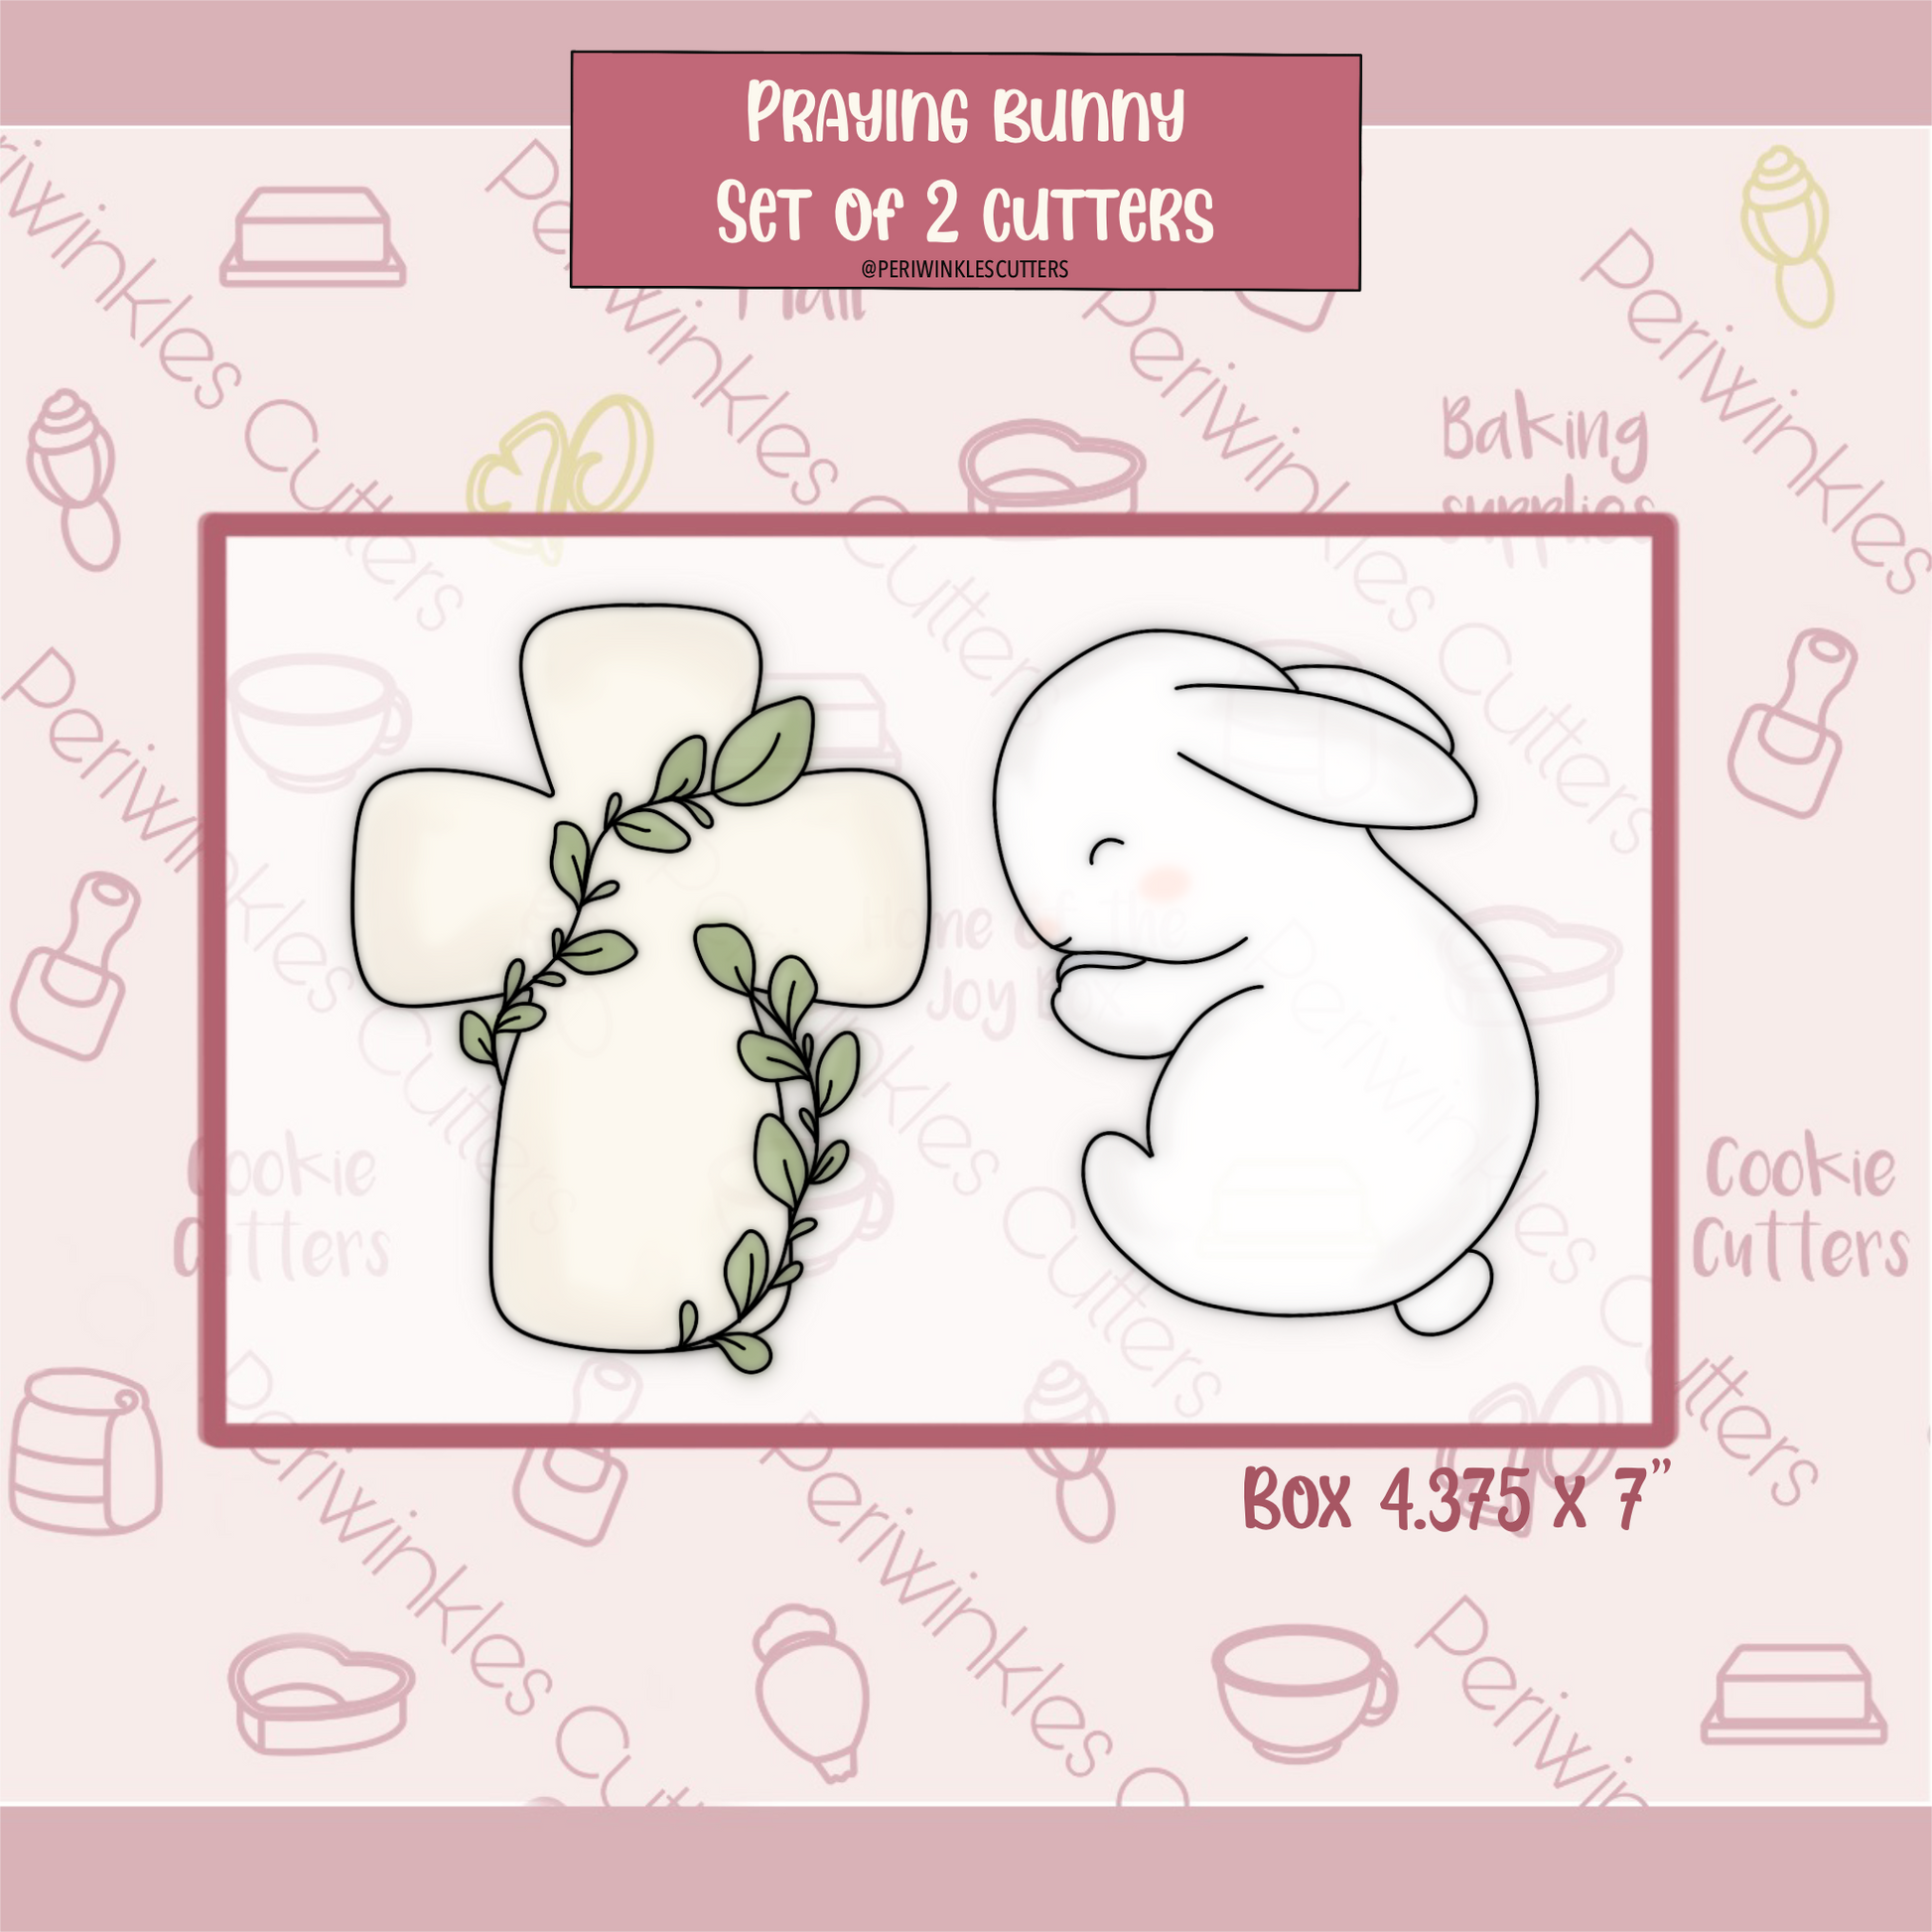 Praying Bunny Set of 2 Cookie Cutter - Periwinkles Cookie Cutters 